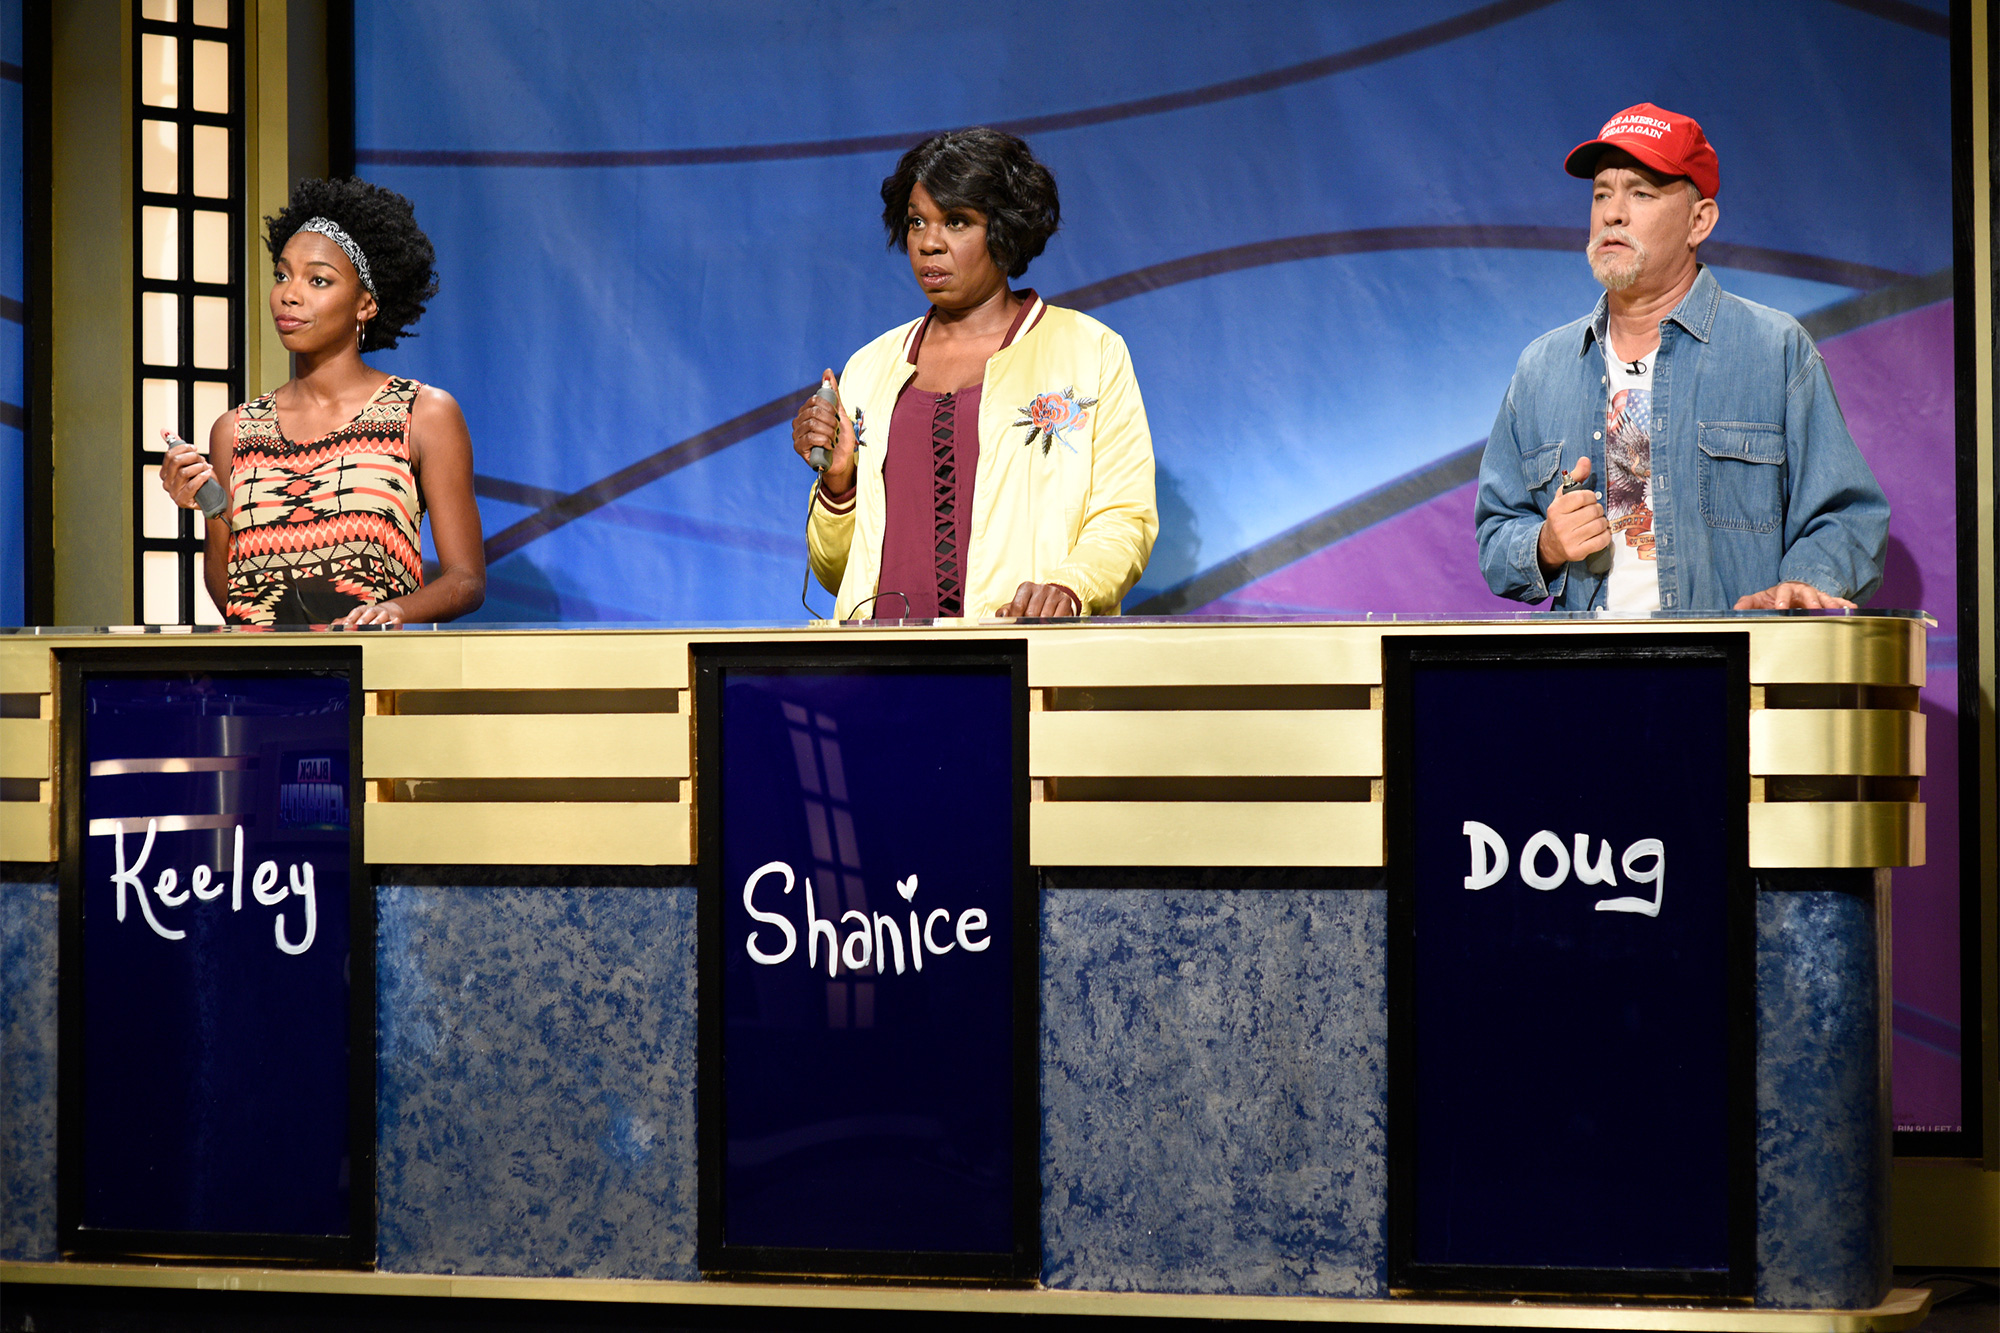 Revisiting the brilliant Saturday Night Live Black Jeopardy sketch featuring Tom Hanks